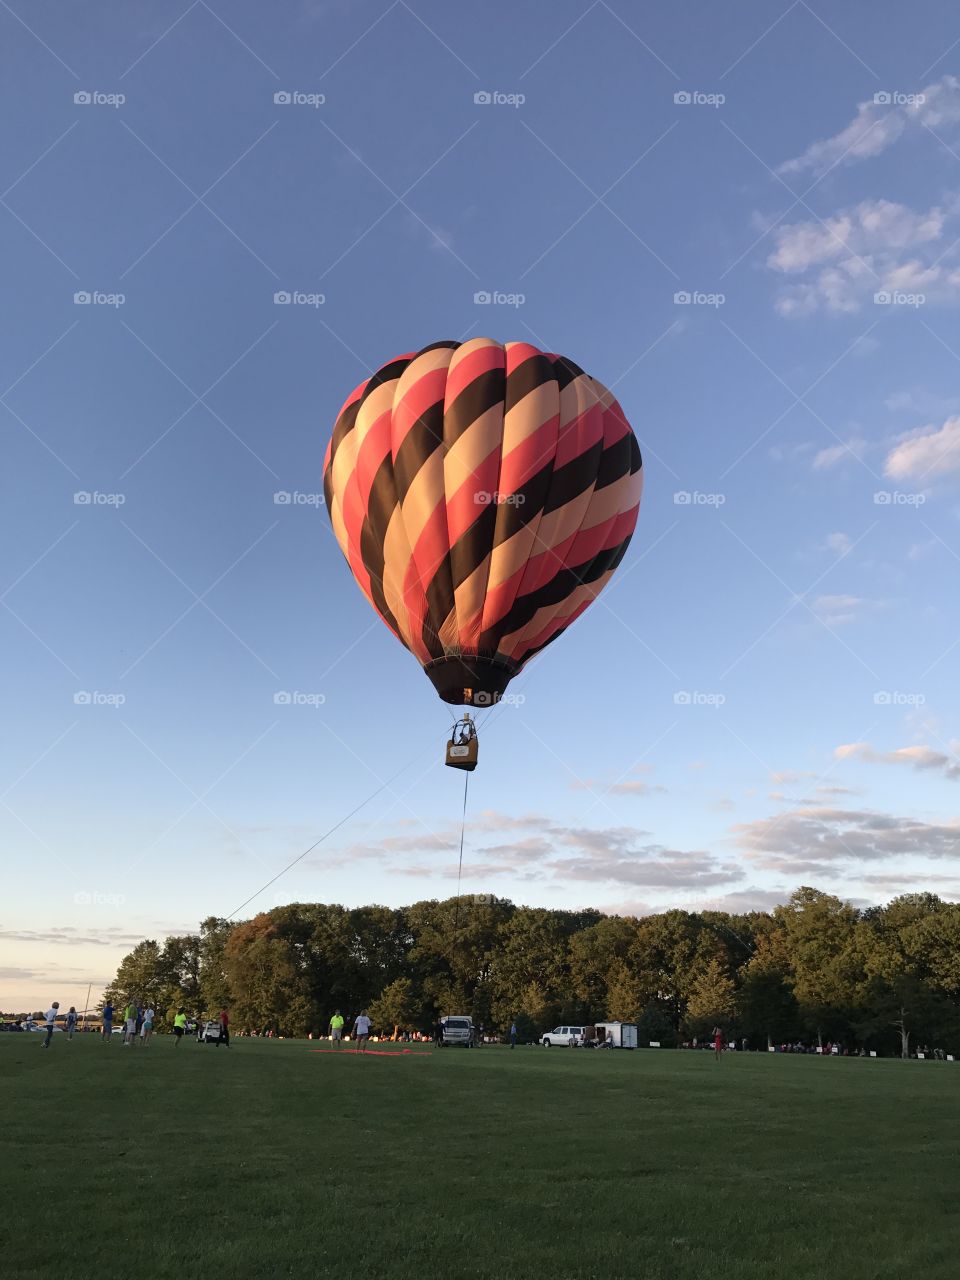 Pink and black balloon in air